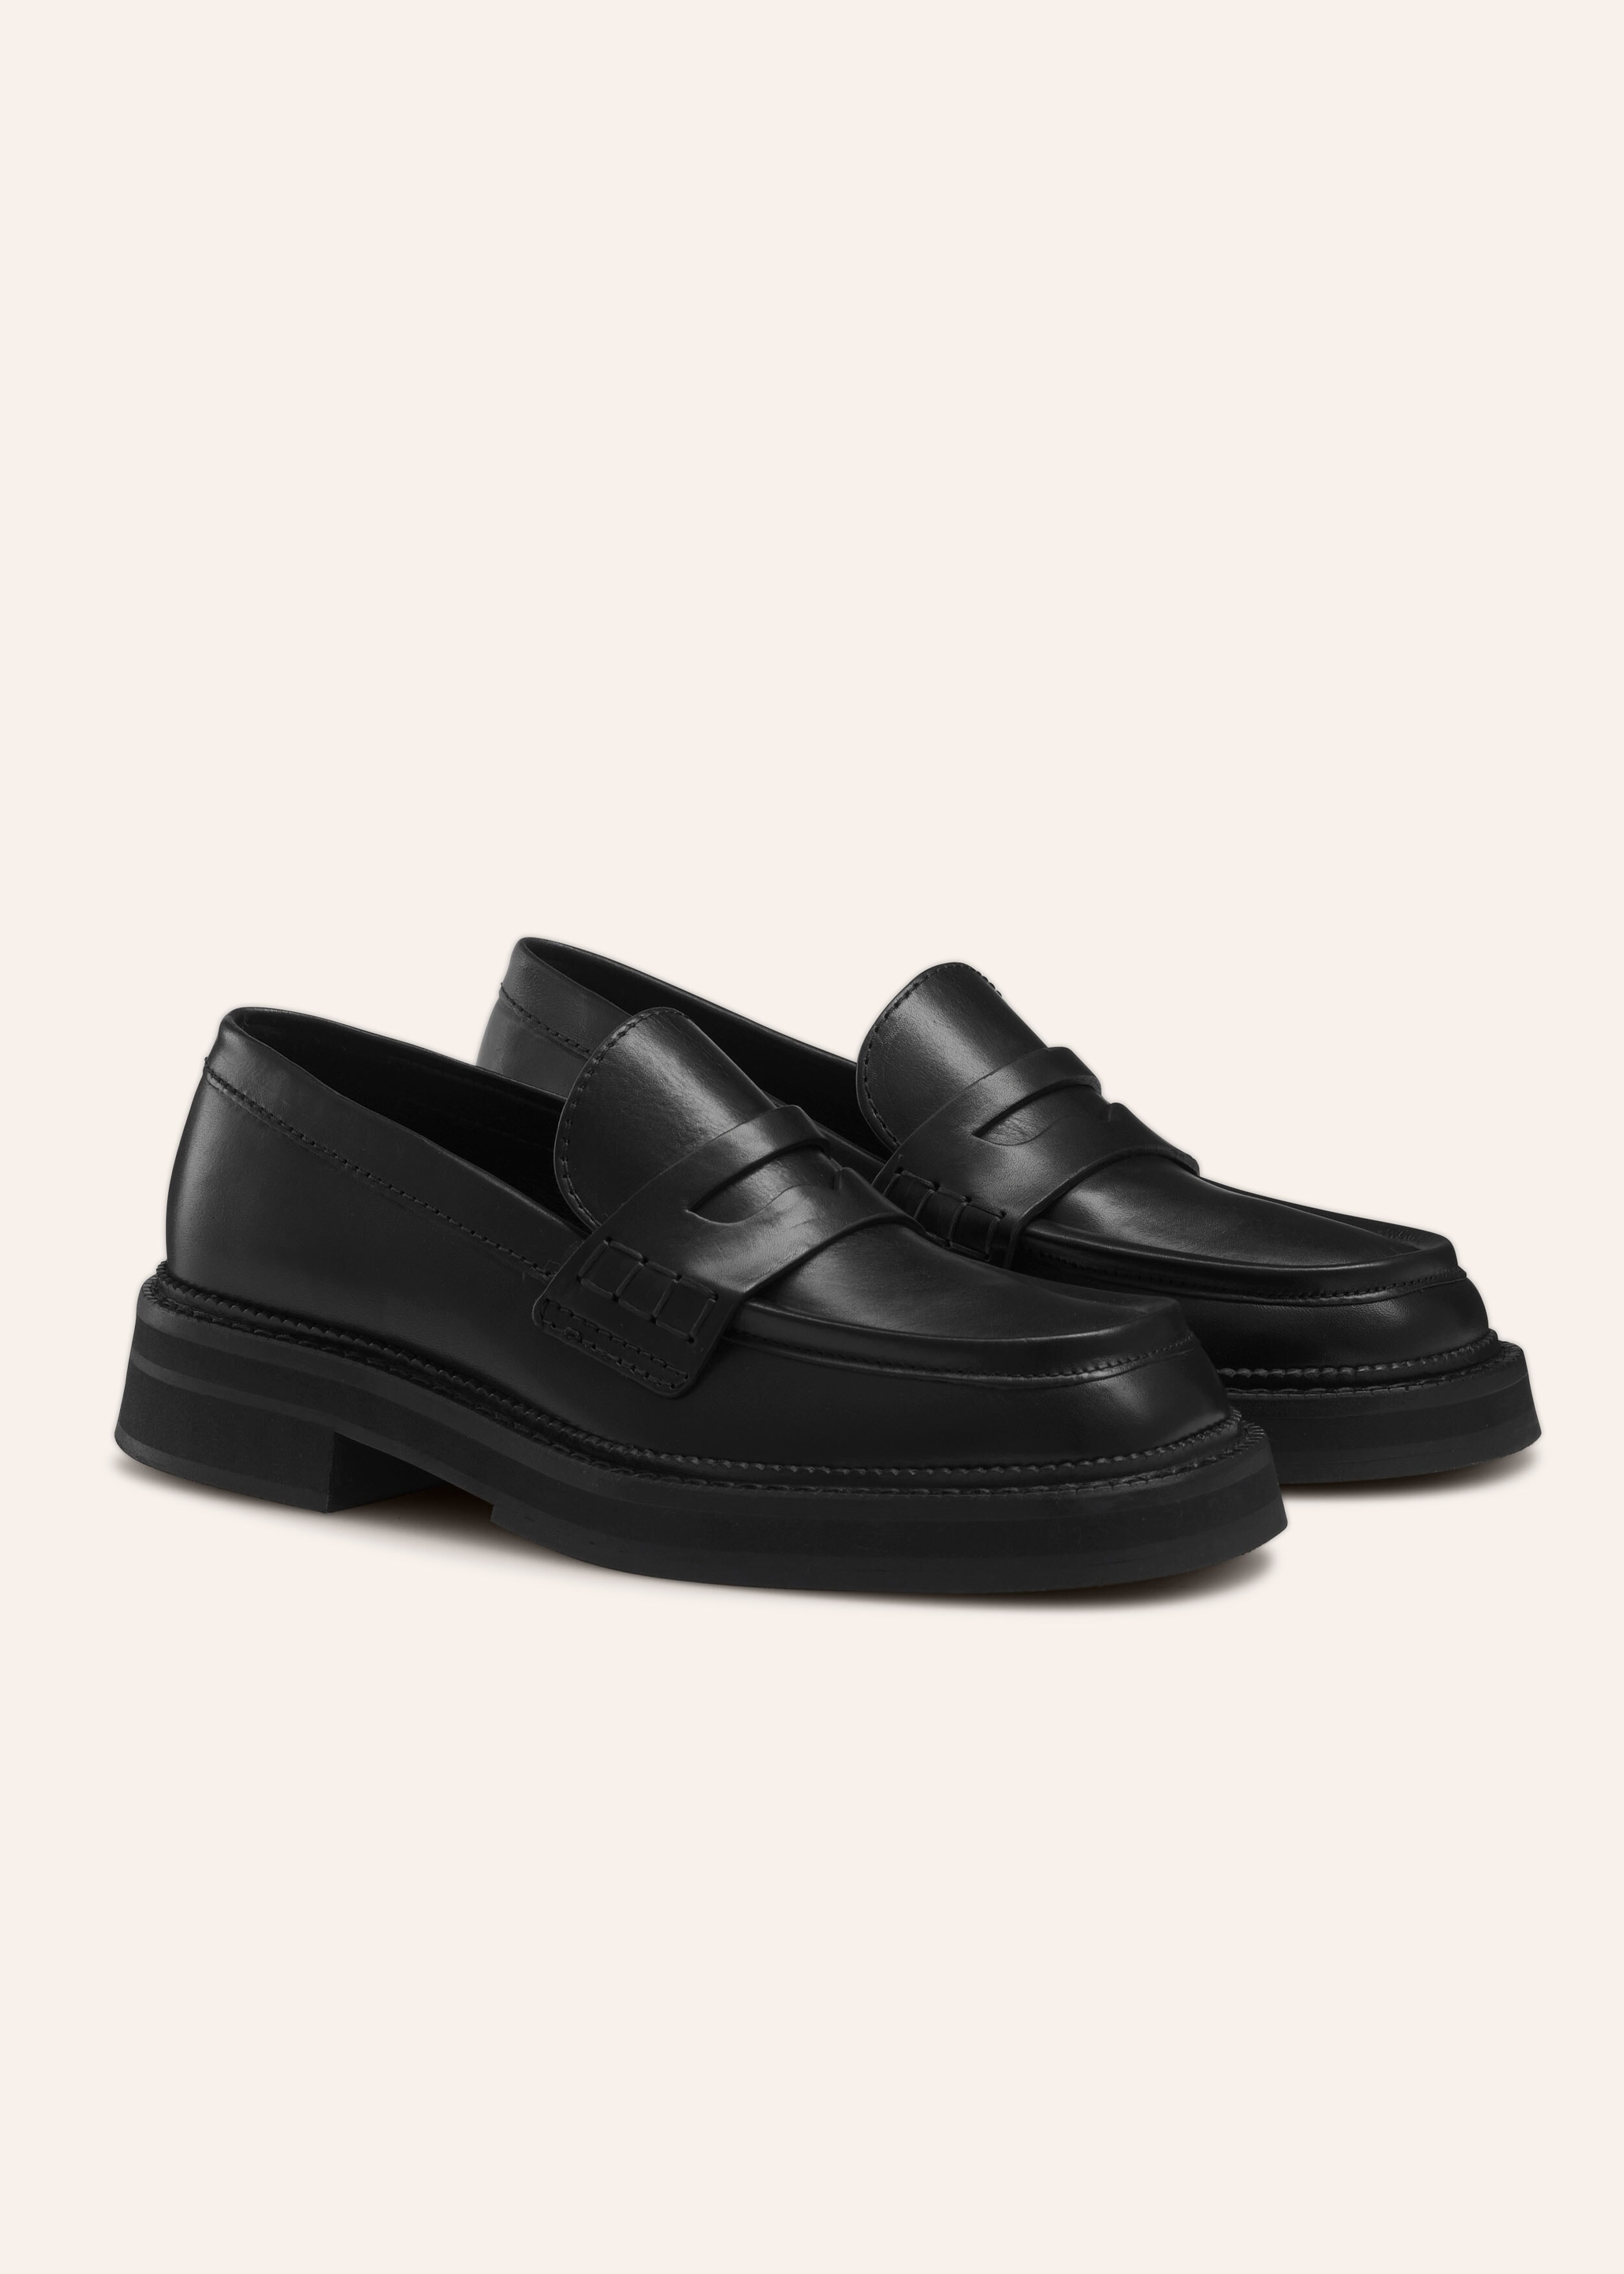 Chunky Square Toe Loafer Black